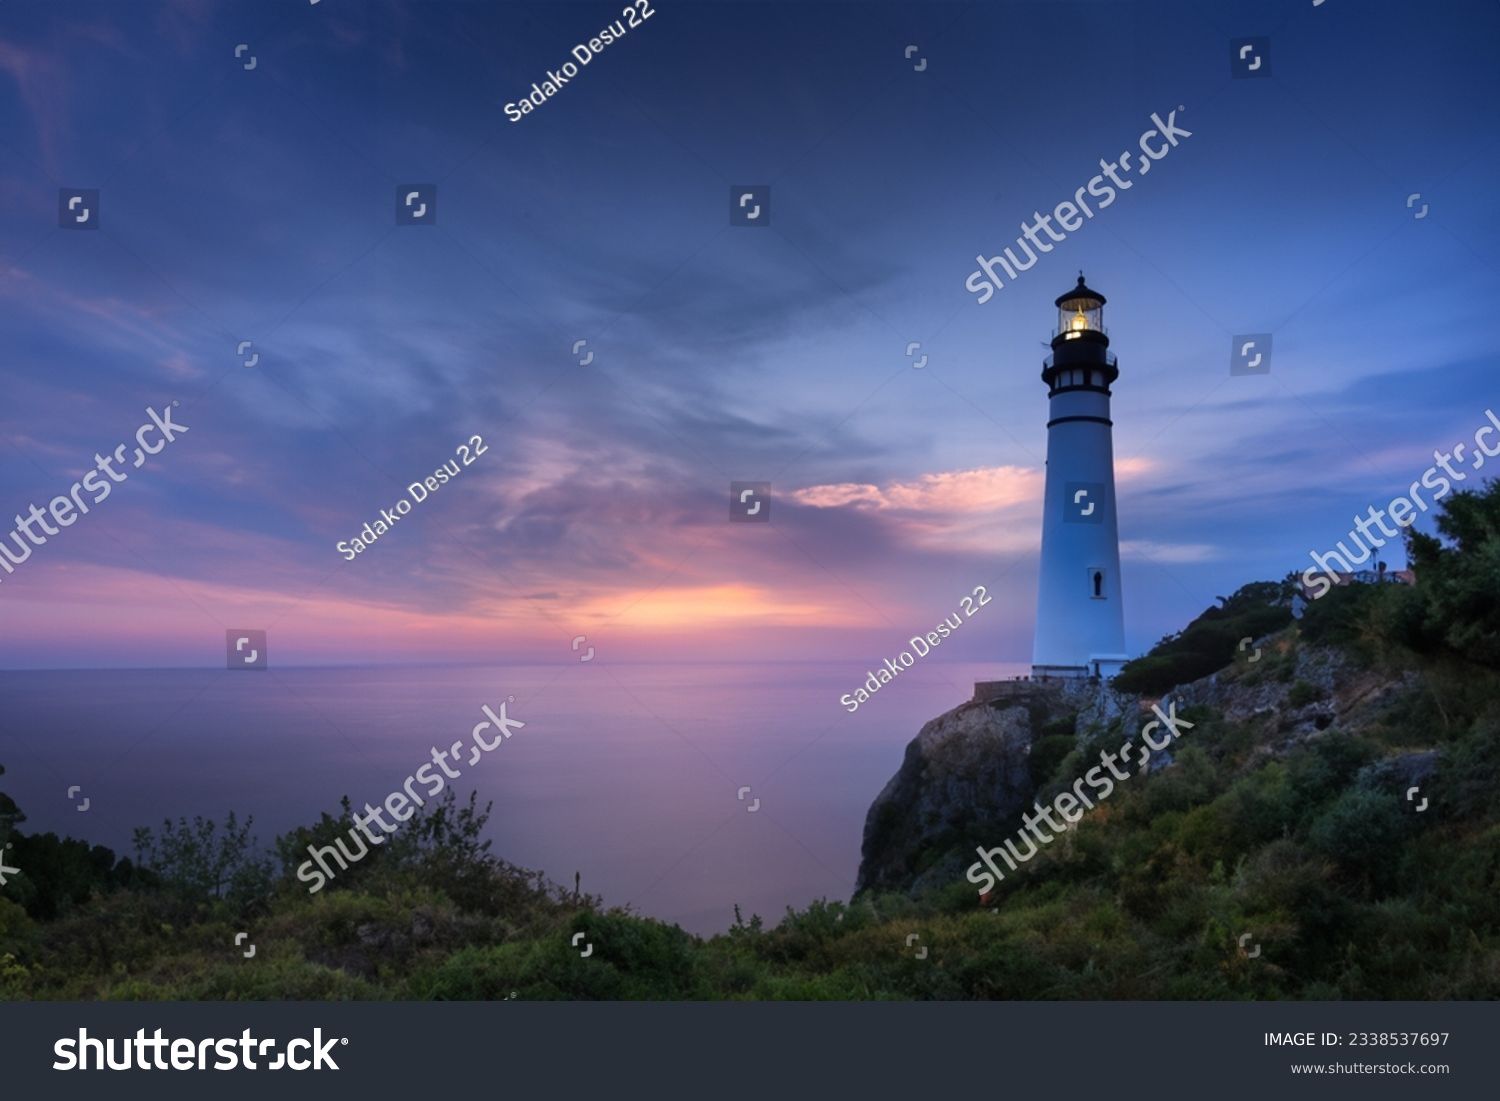 Coastal Security: Illuminated Lighthouse Guides Travelers to Protected Beach at Sunset #2338537697